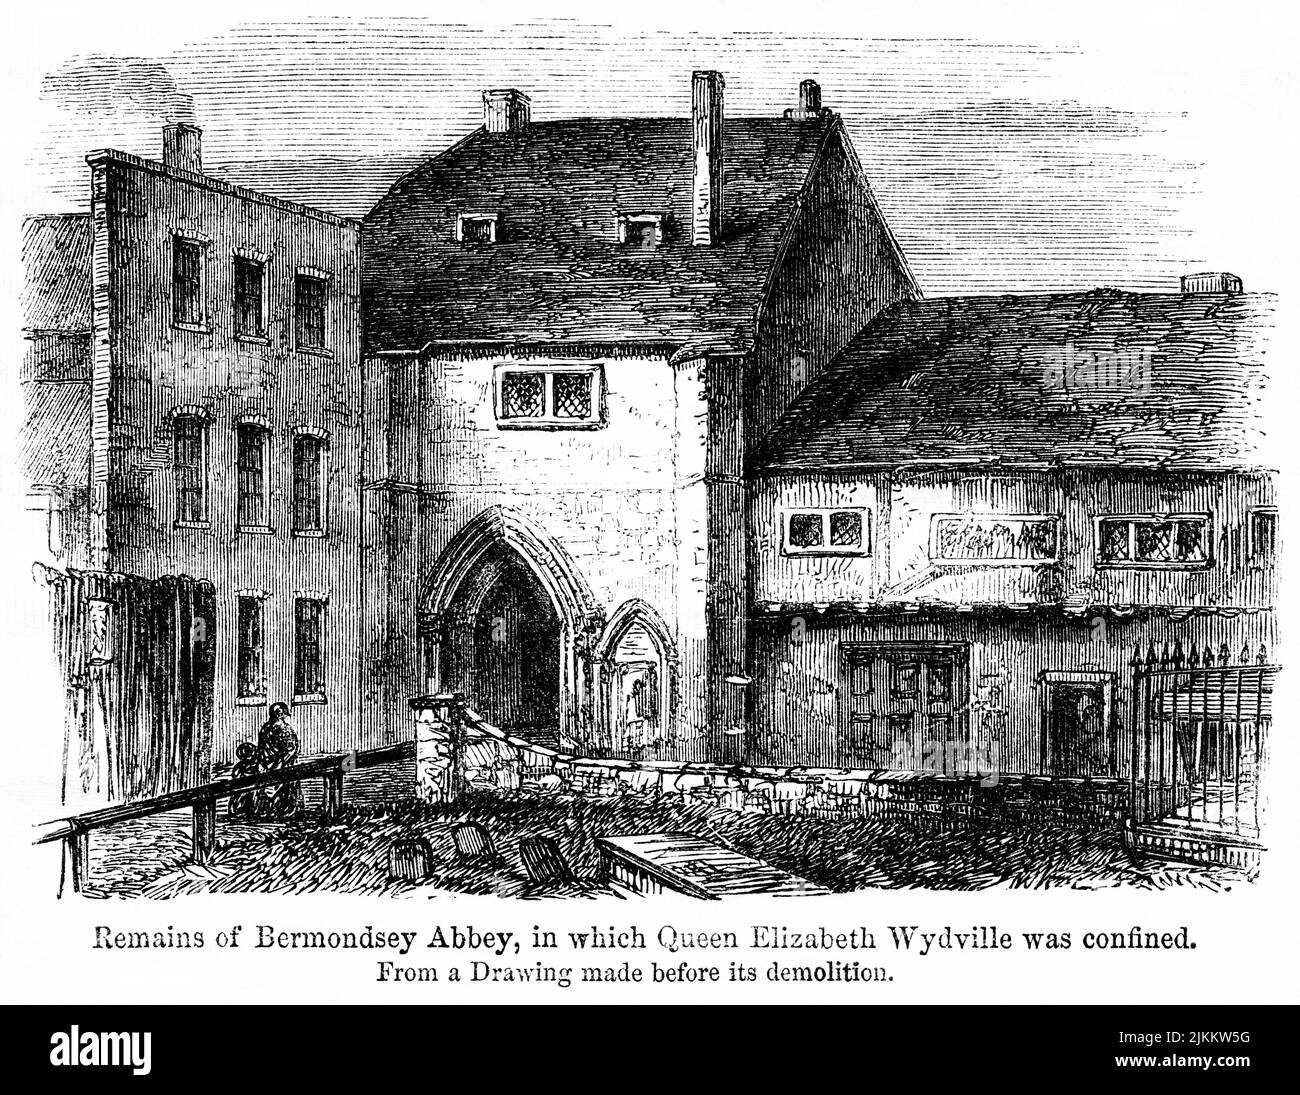 Remains of Bermondsey Abbey, in which Queen Elizabeth Wydville was confined, Illustration from the Book, 'John Cassel’s Illustrated History of England, Volume II', text by William Howitt, Cassell, Petter, and Galpin, London, 1858 Stock Photo